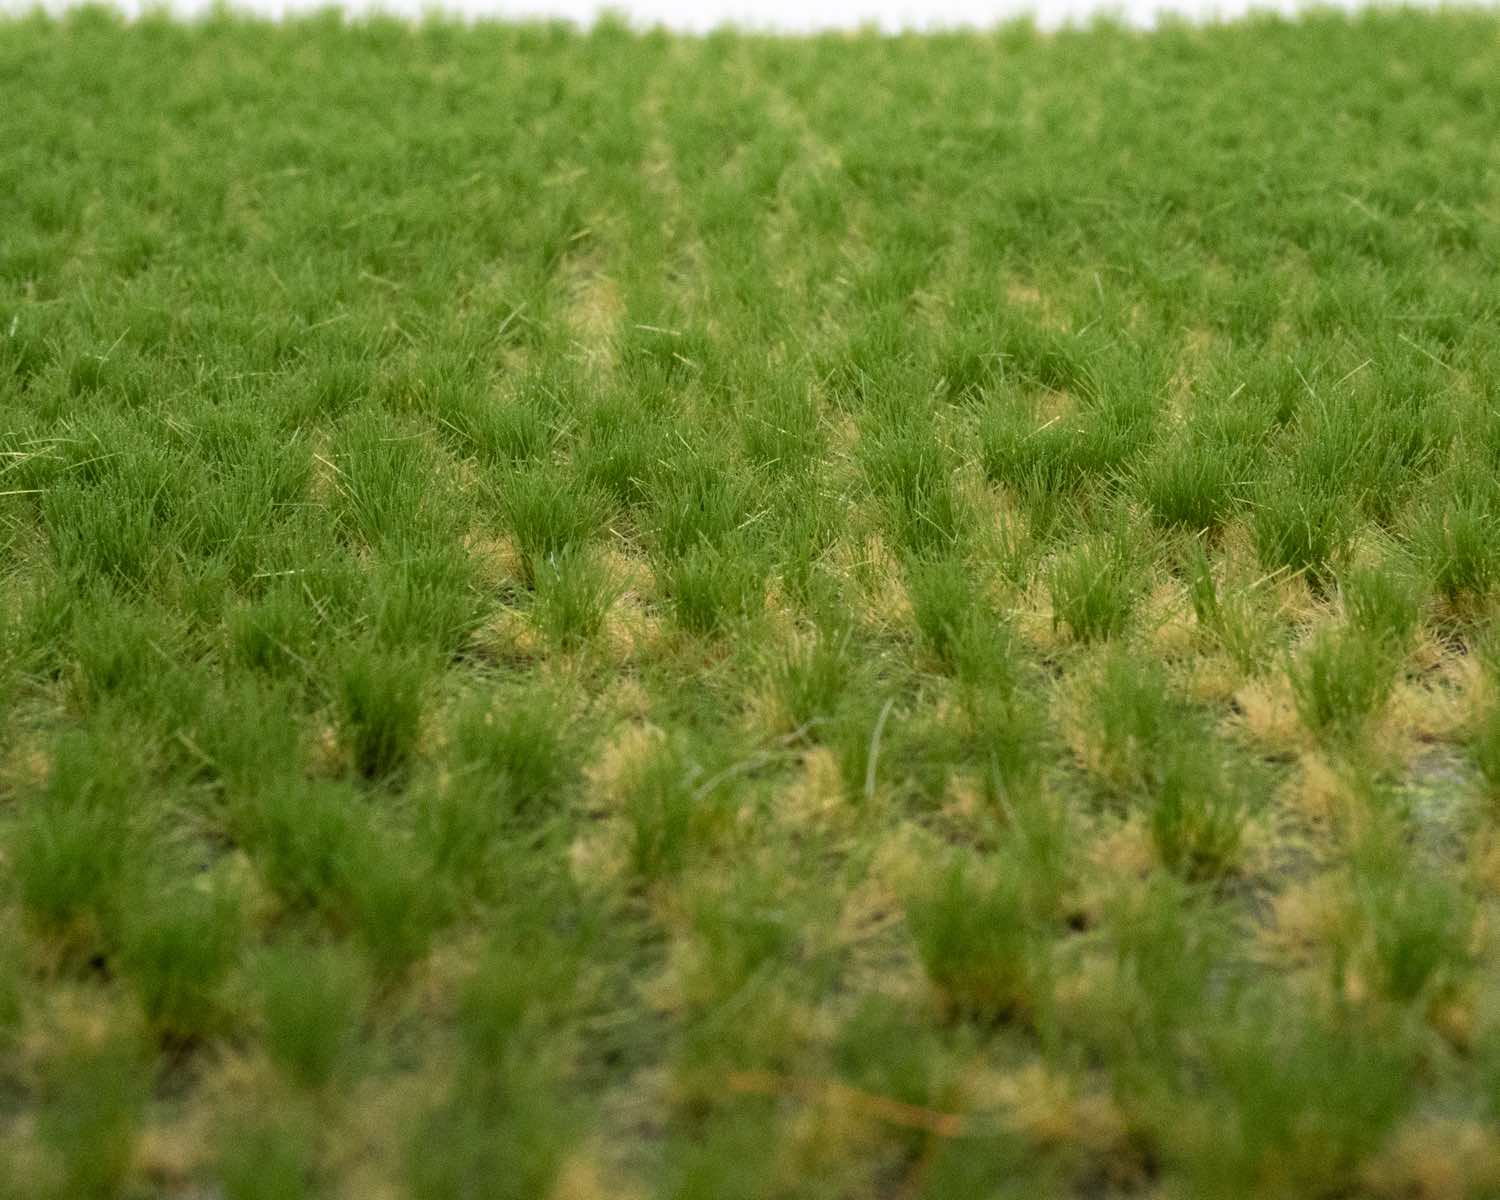 tufts of grass